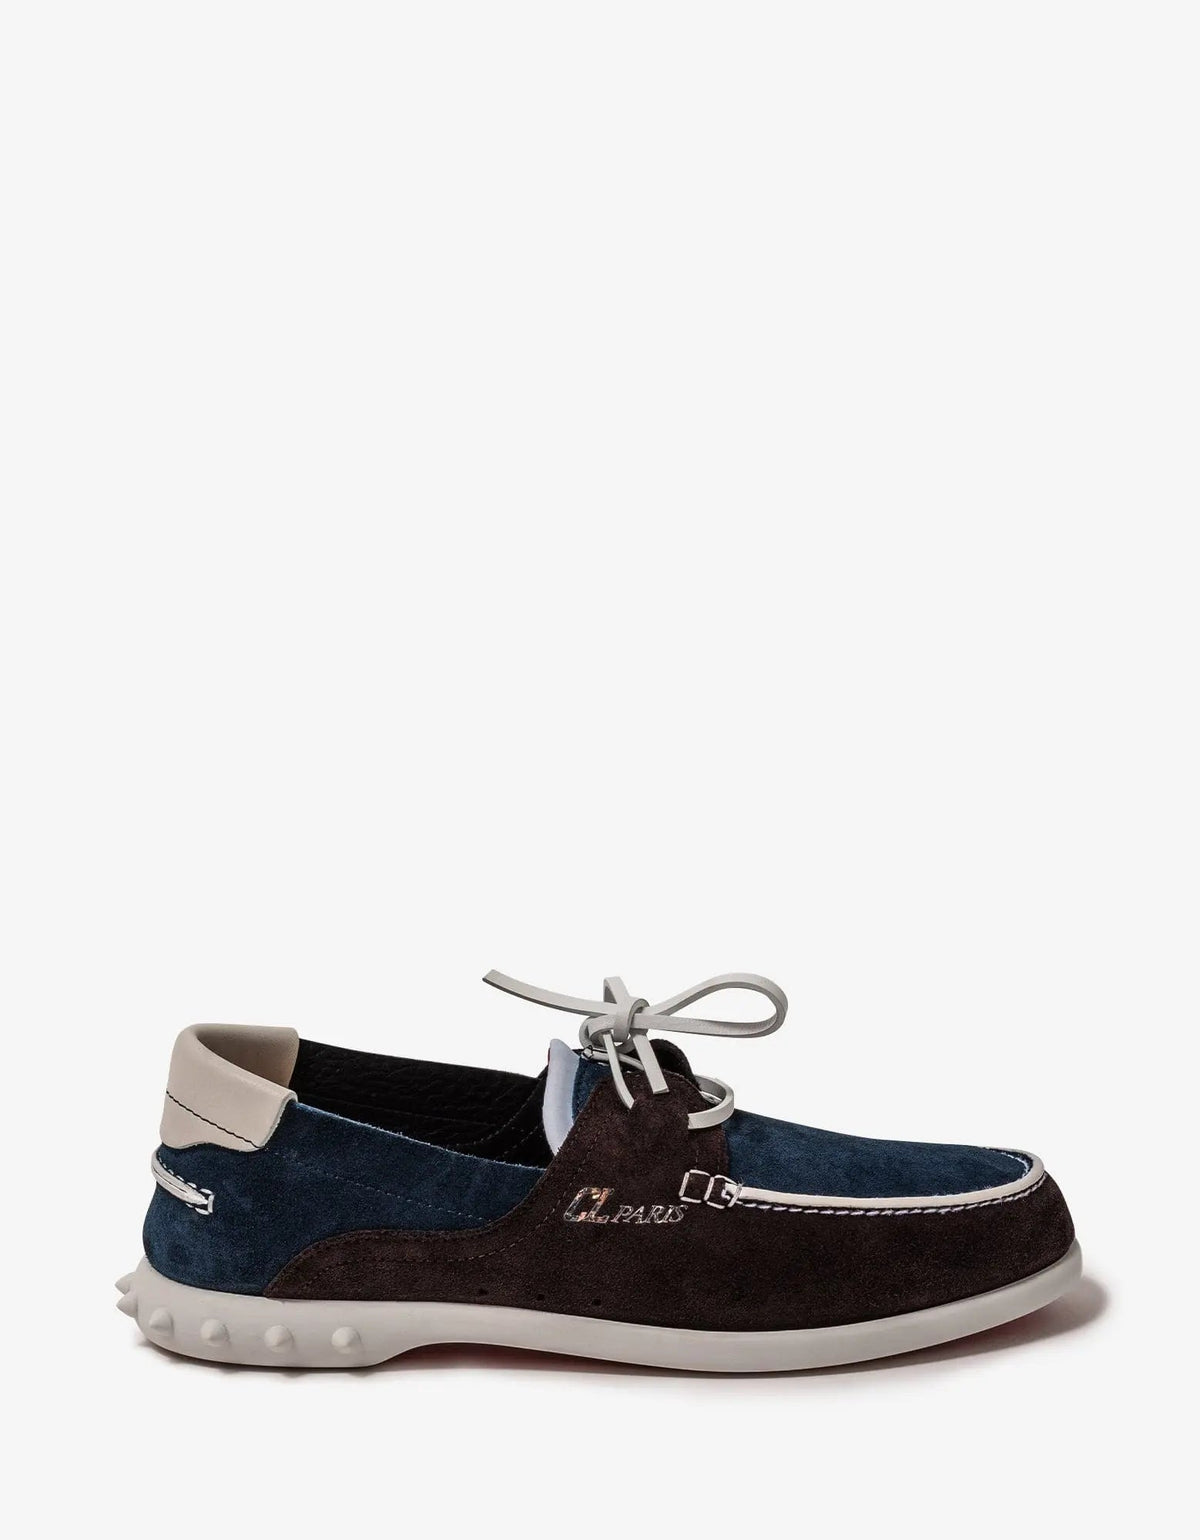 Christian Louboutin Geromoc Navy & Brown Suede Leather Loafers